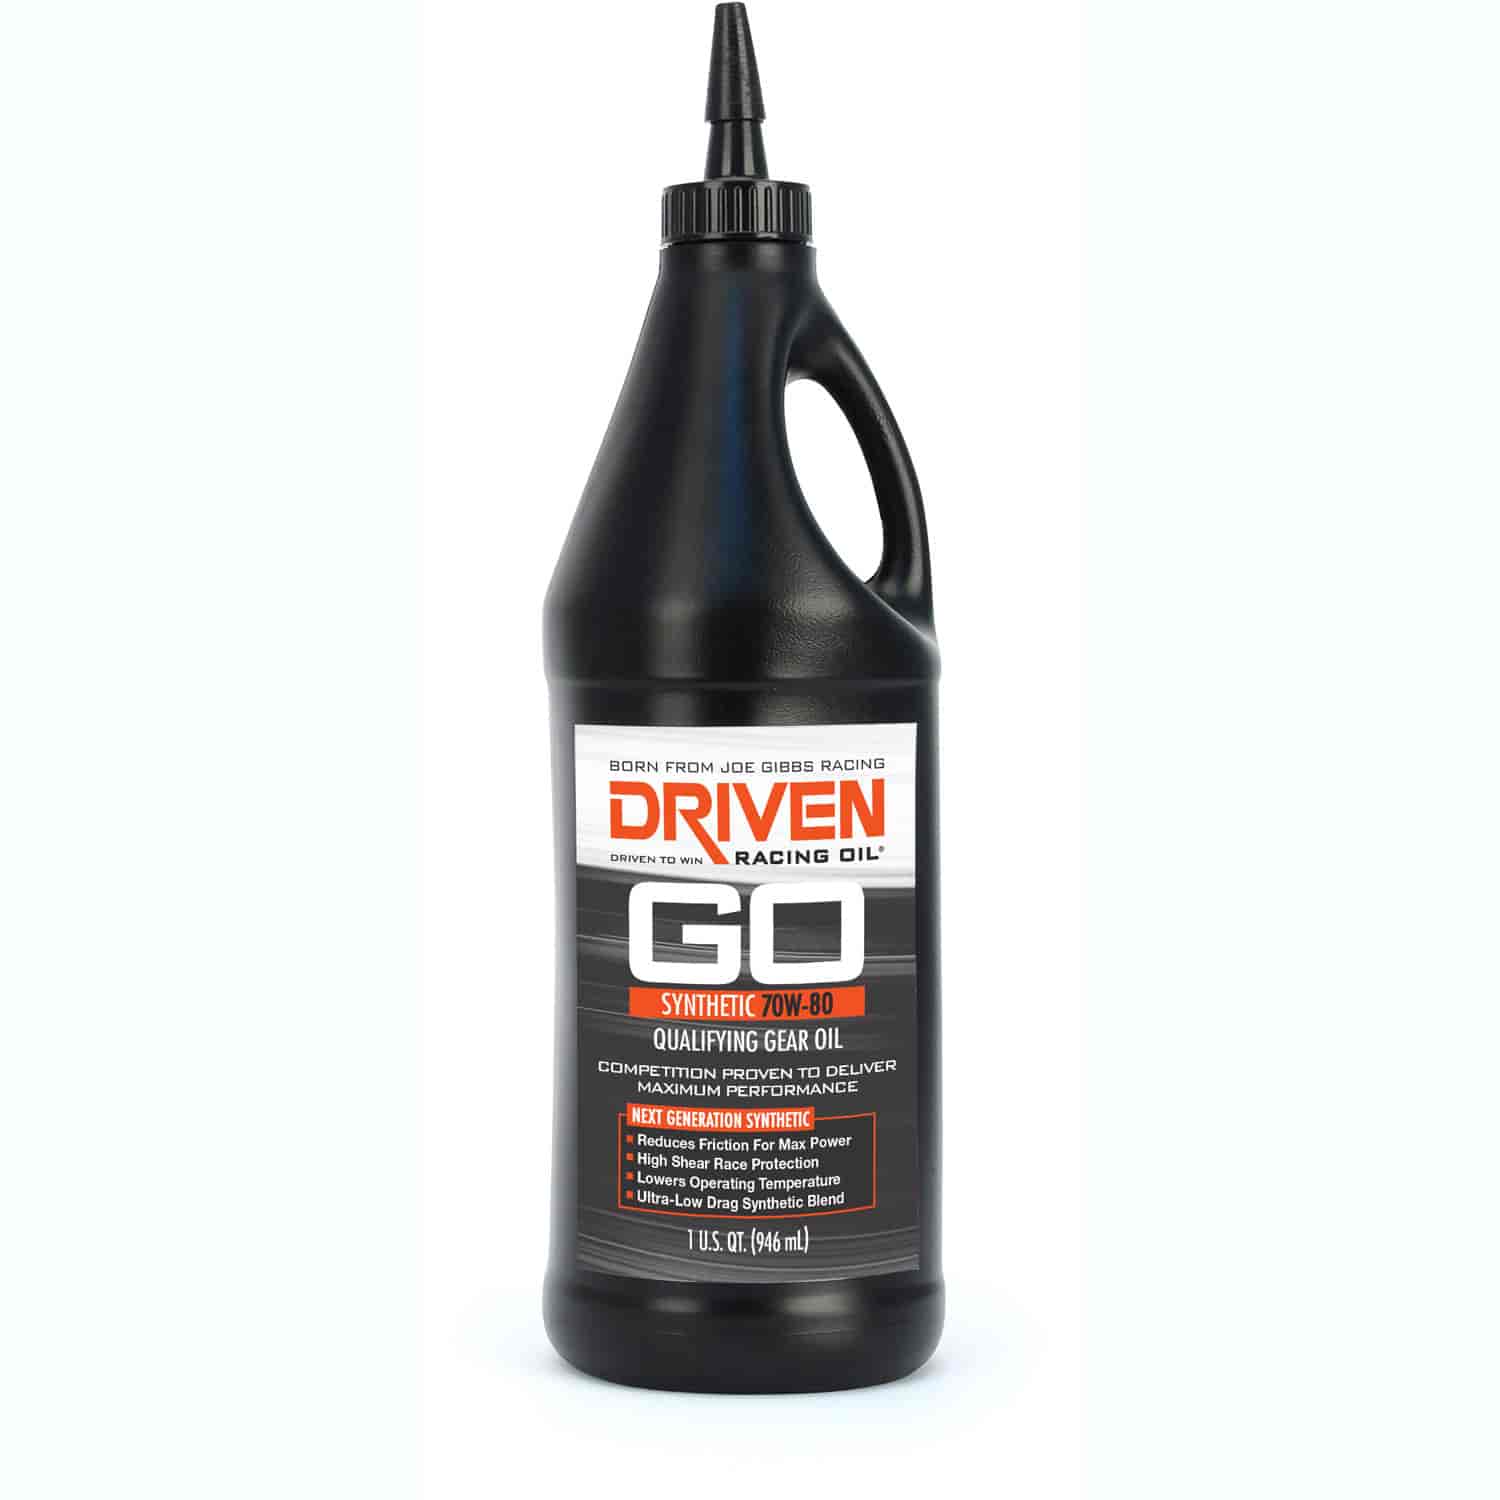 Synthetic 70W-80 Qualifying Racing Gear Oil 1 Quart